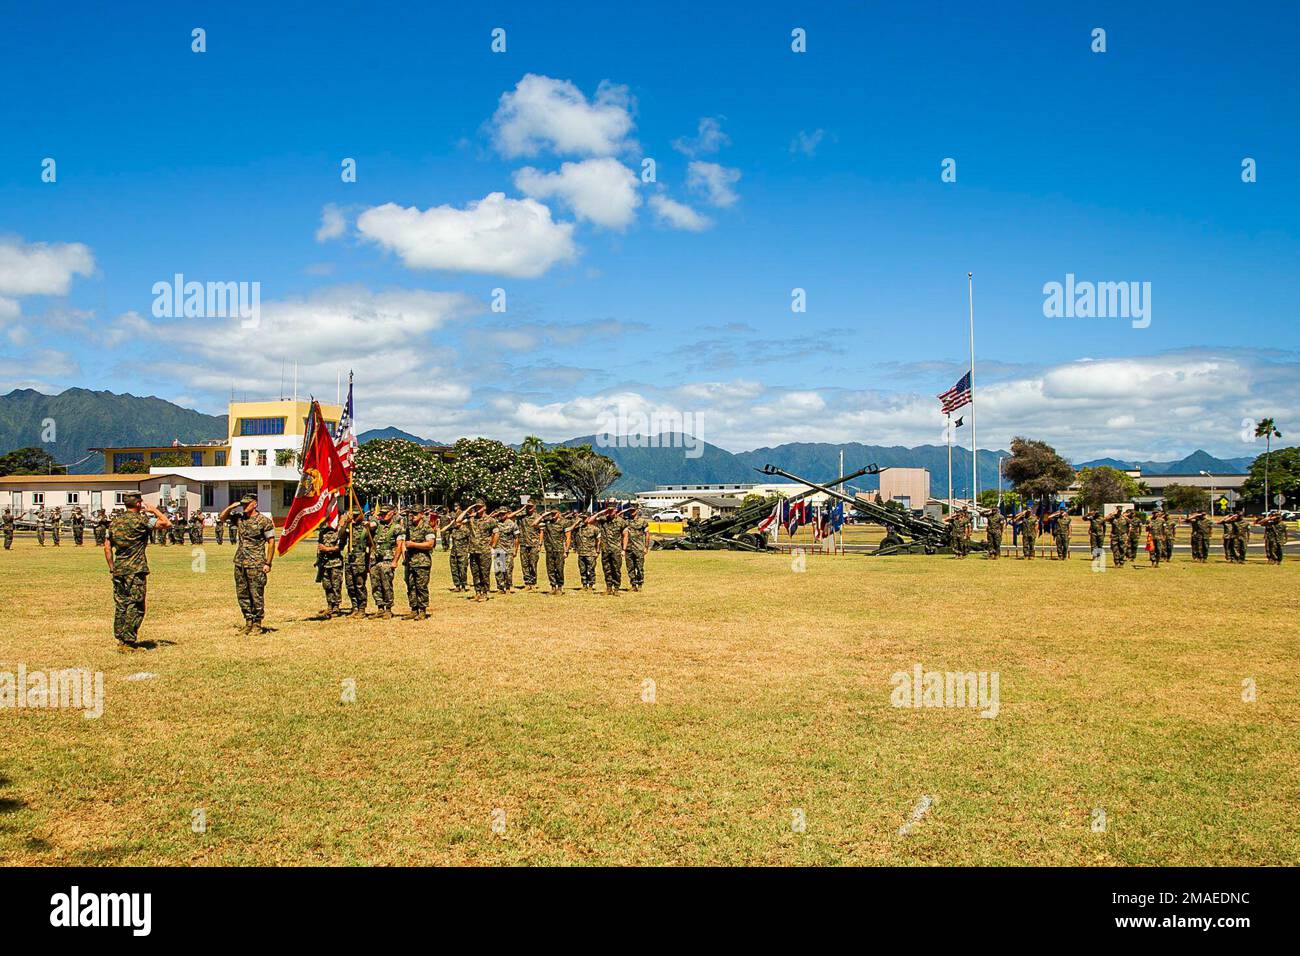 U.S. Marine Corps Lt. Col. Richard Neikirk, outgoing commanding officer, 1st Battalion, 12th Marine Regiment, renders a salute during the unit’s change of command ceremony on Marine Corps Base Hawaii, May 26, 2022. LtCol. Neikirk relinquished command of 1st Battalion, 12th Marines to Lt. Col. Joseph Gill II. Stock Photo